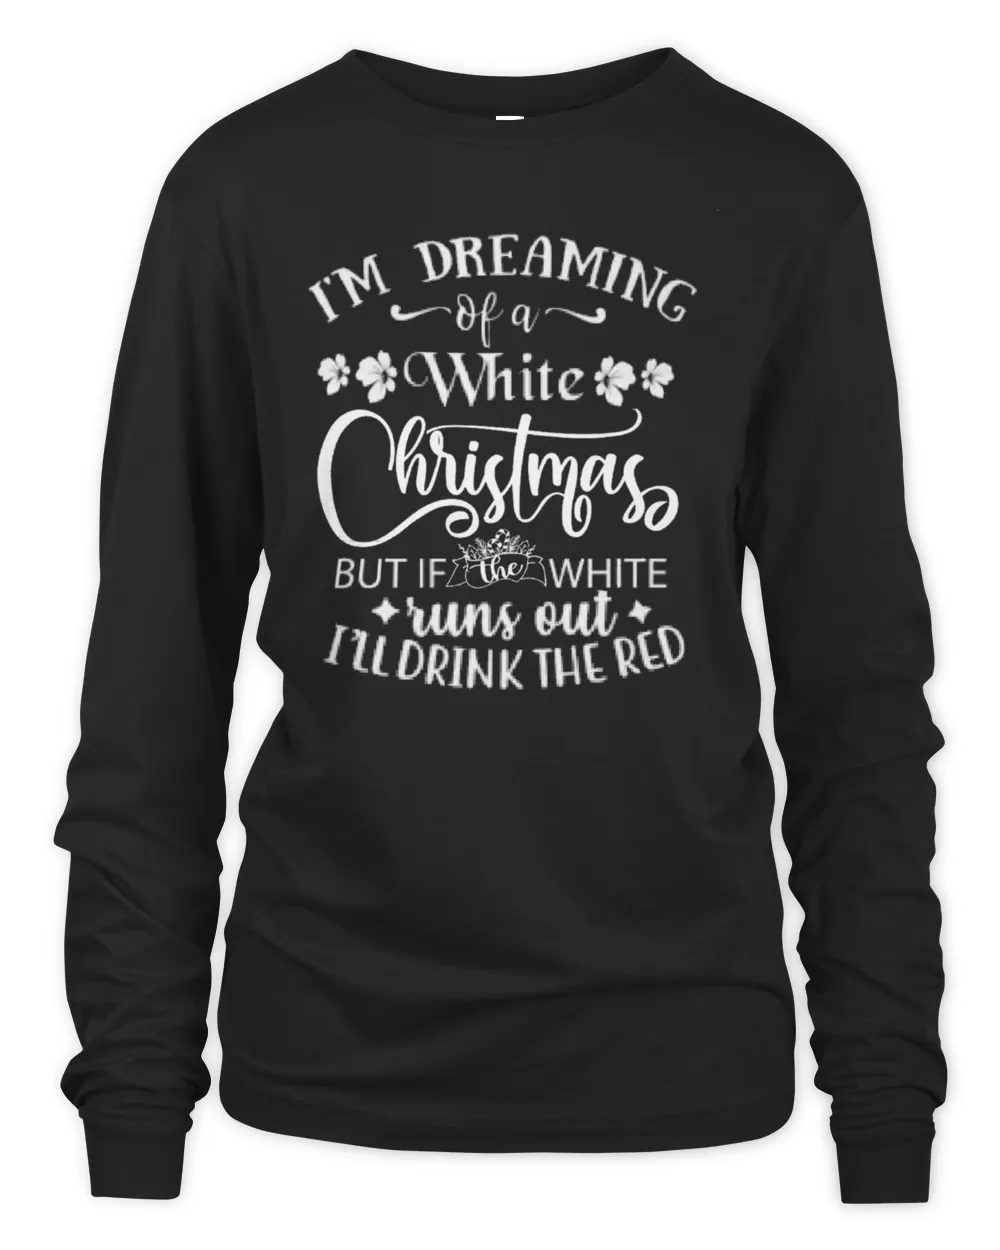 I'm dreaming of a white Christmas. But if the white runs out, I'll drink the red. T-Shirt